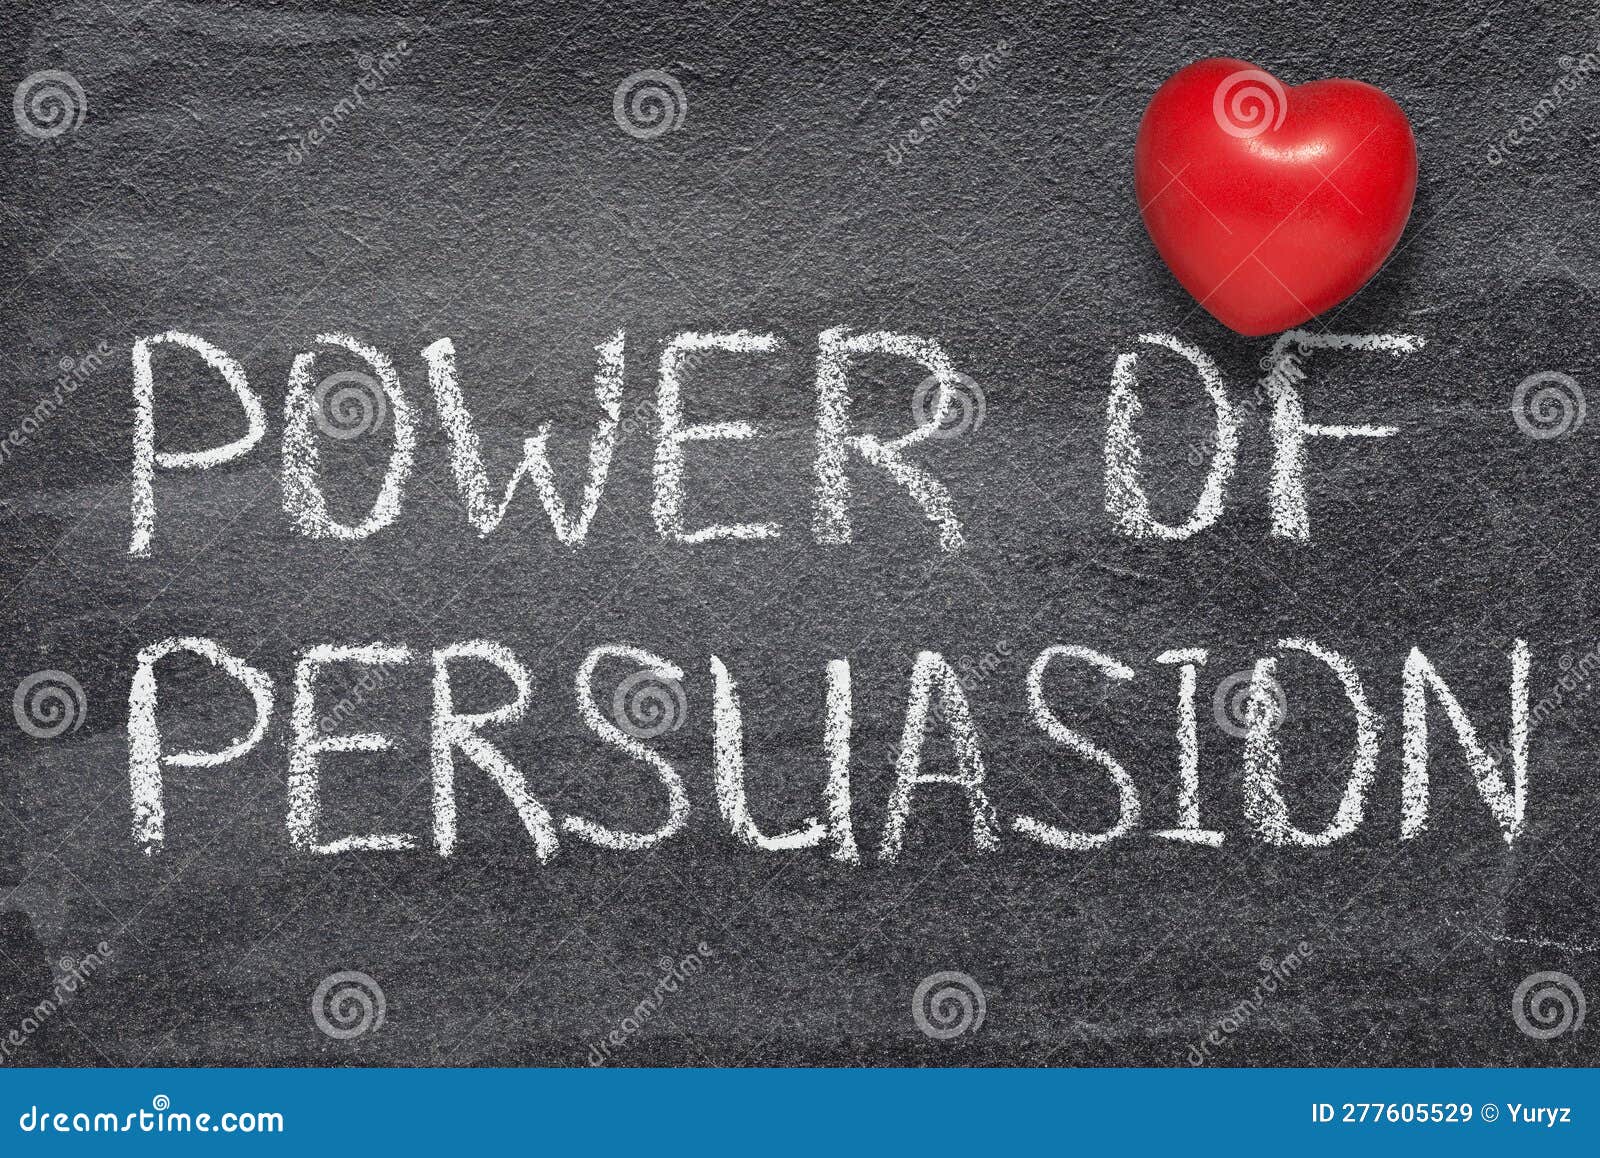 power of persuasion heart